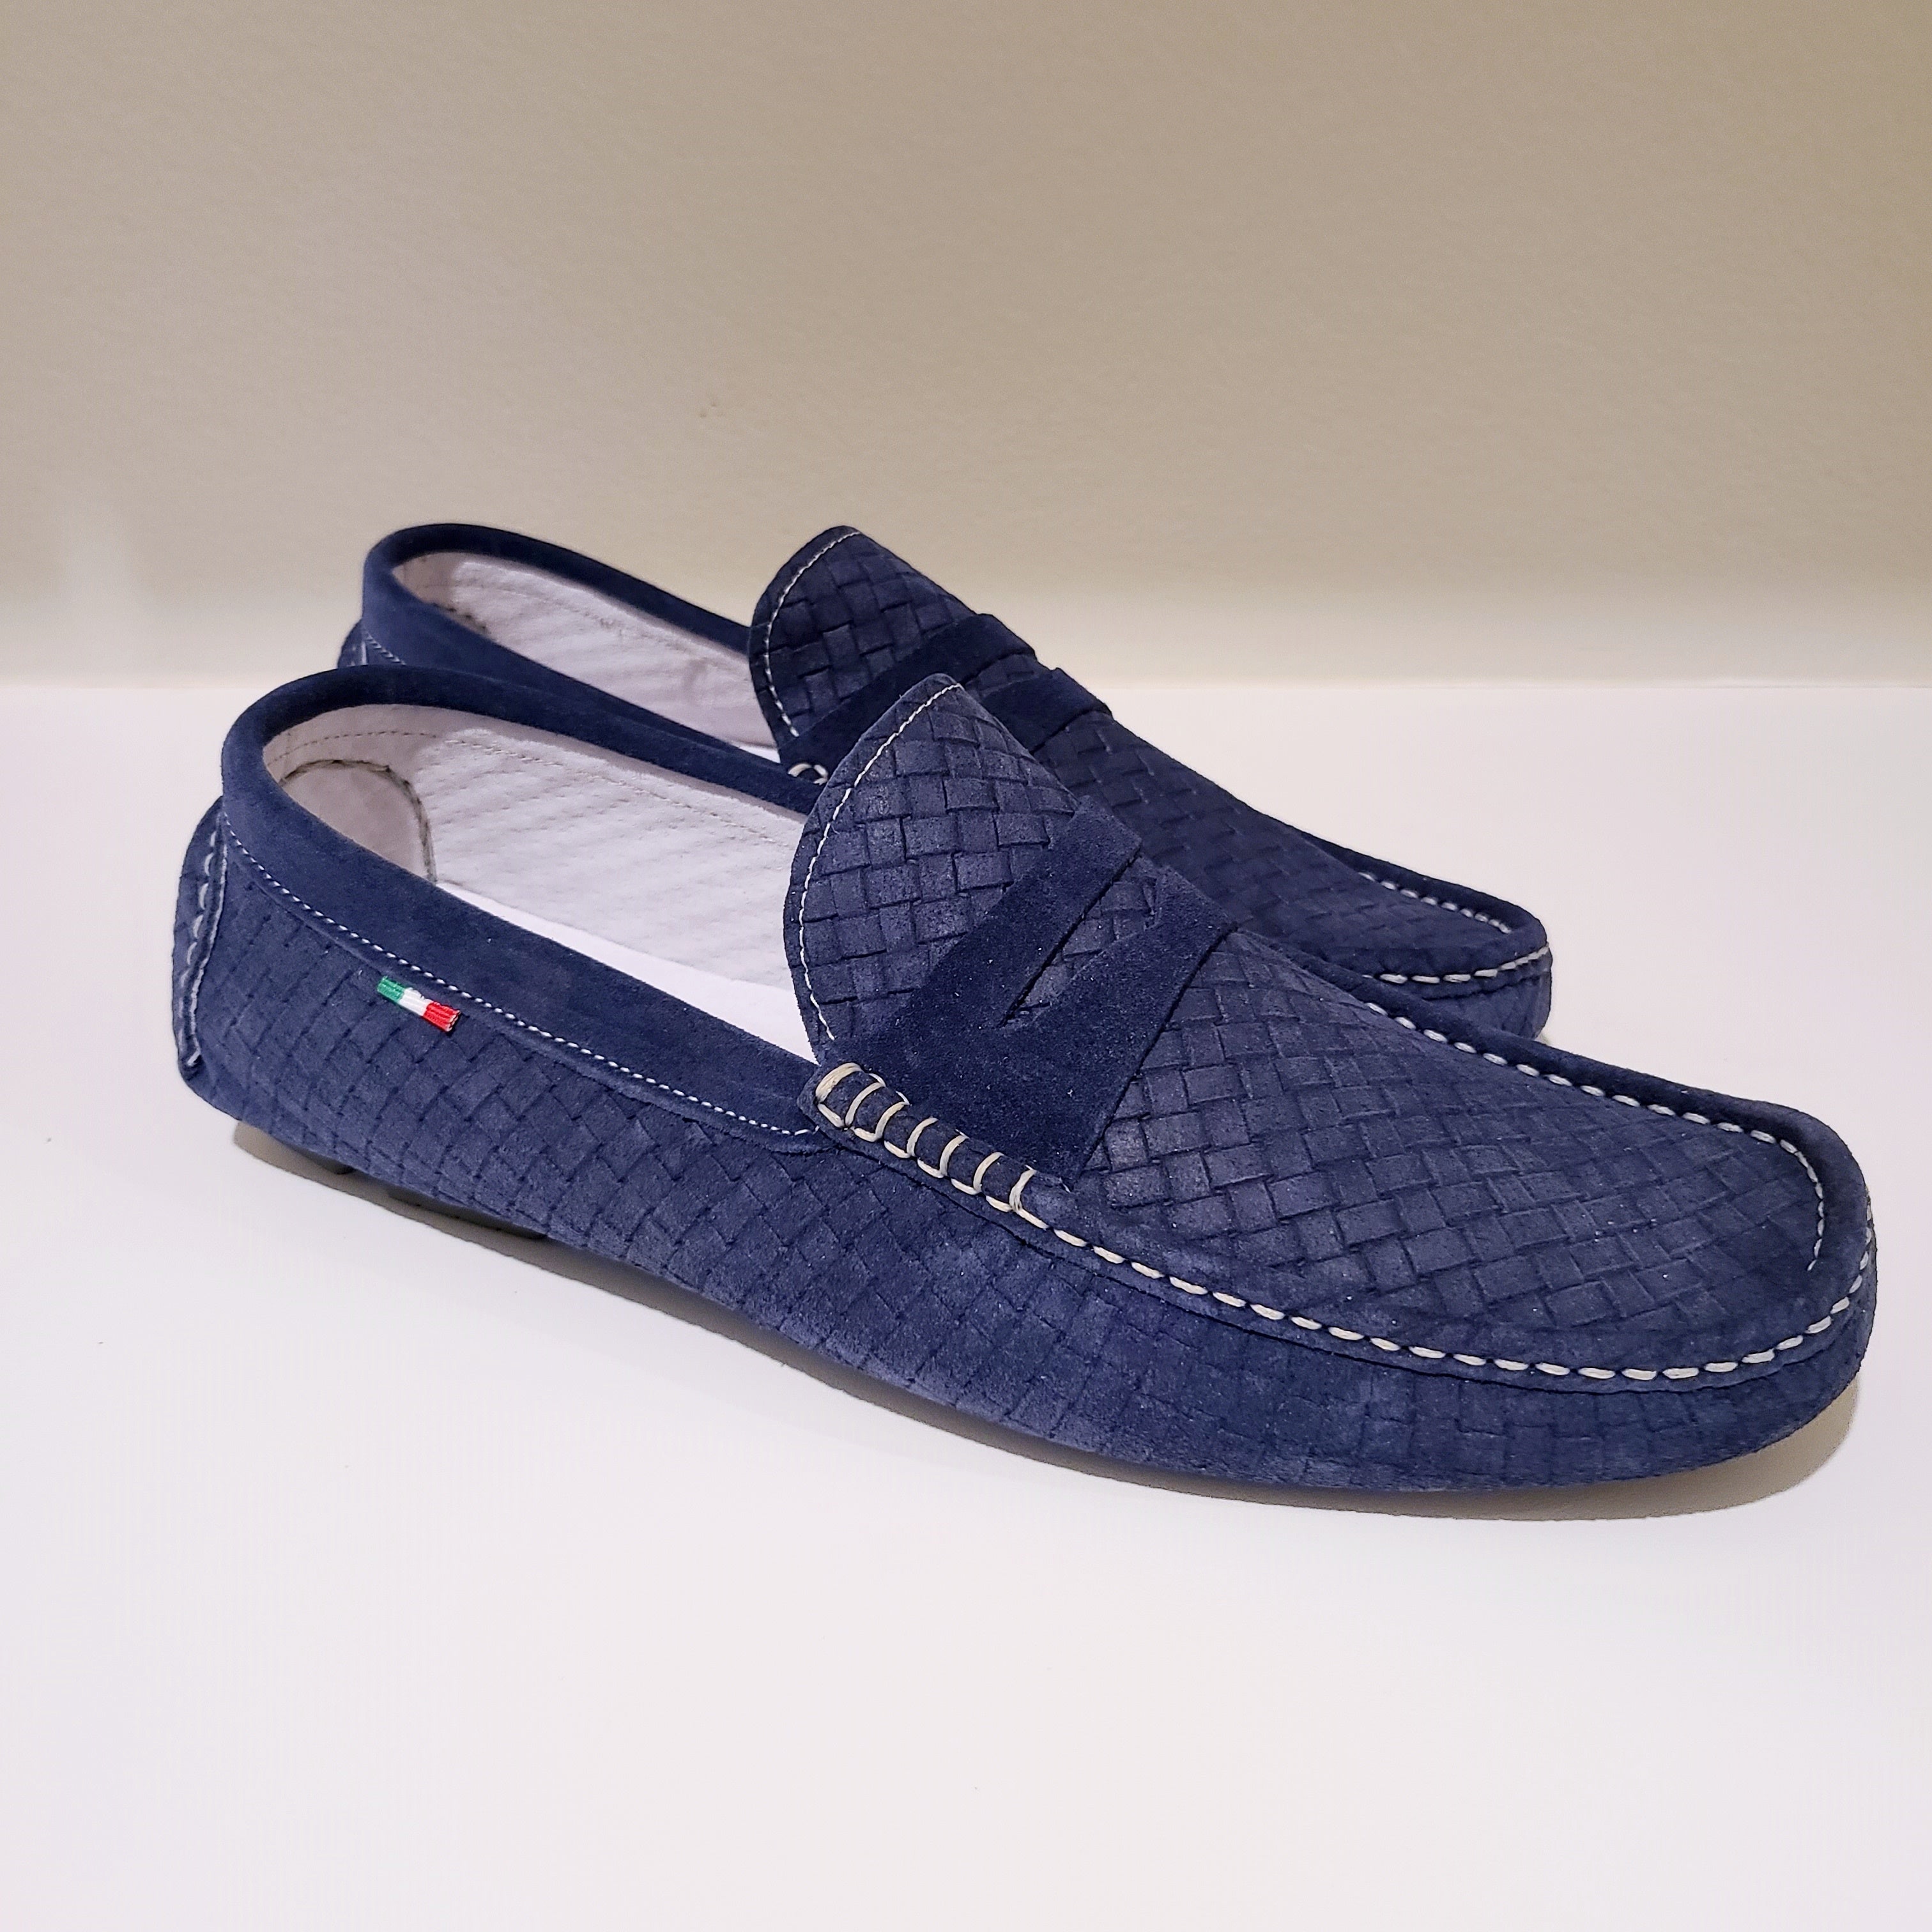 CarroPositano 03 Penny loafers men in Italian leather Suede